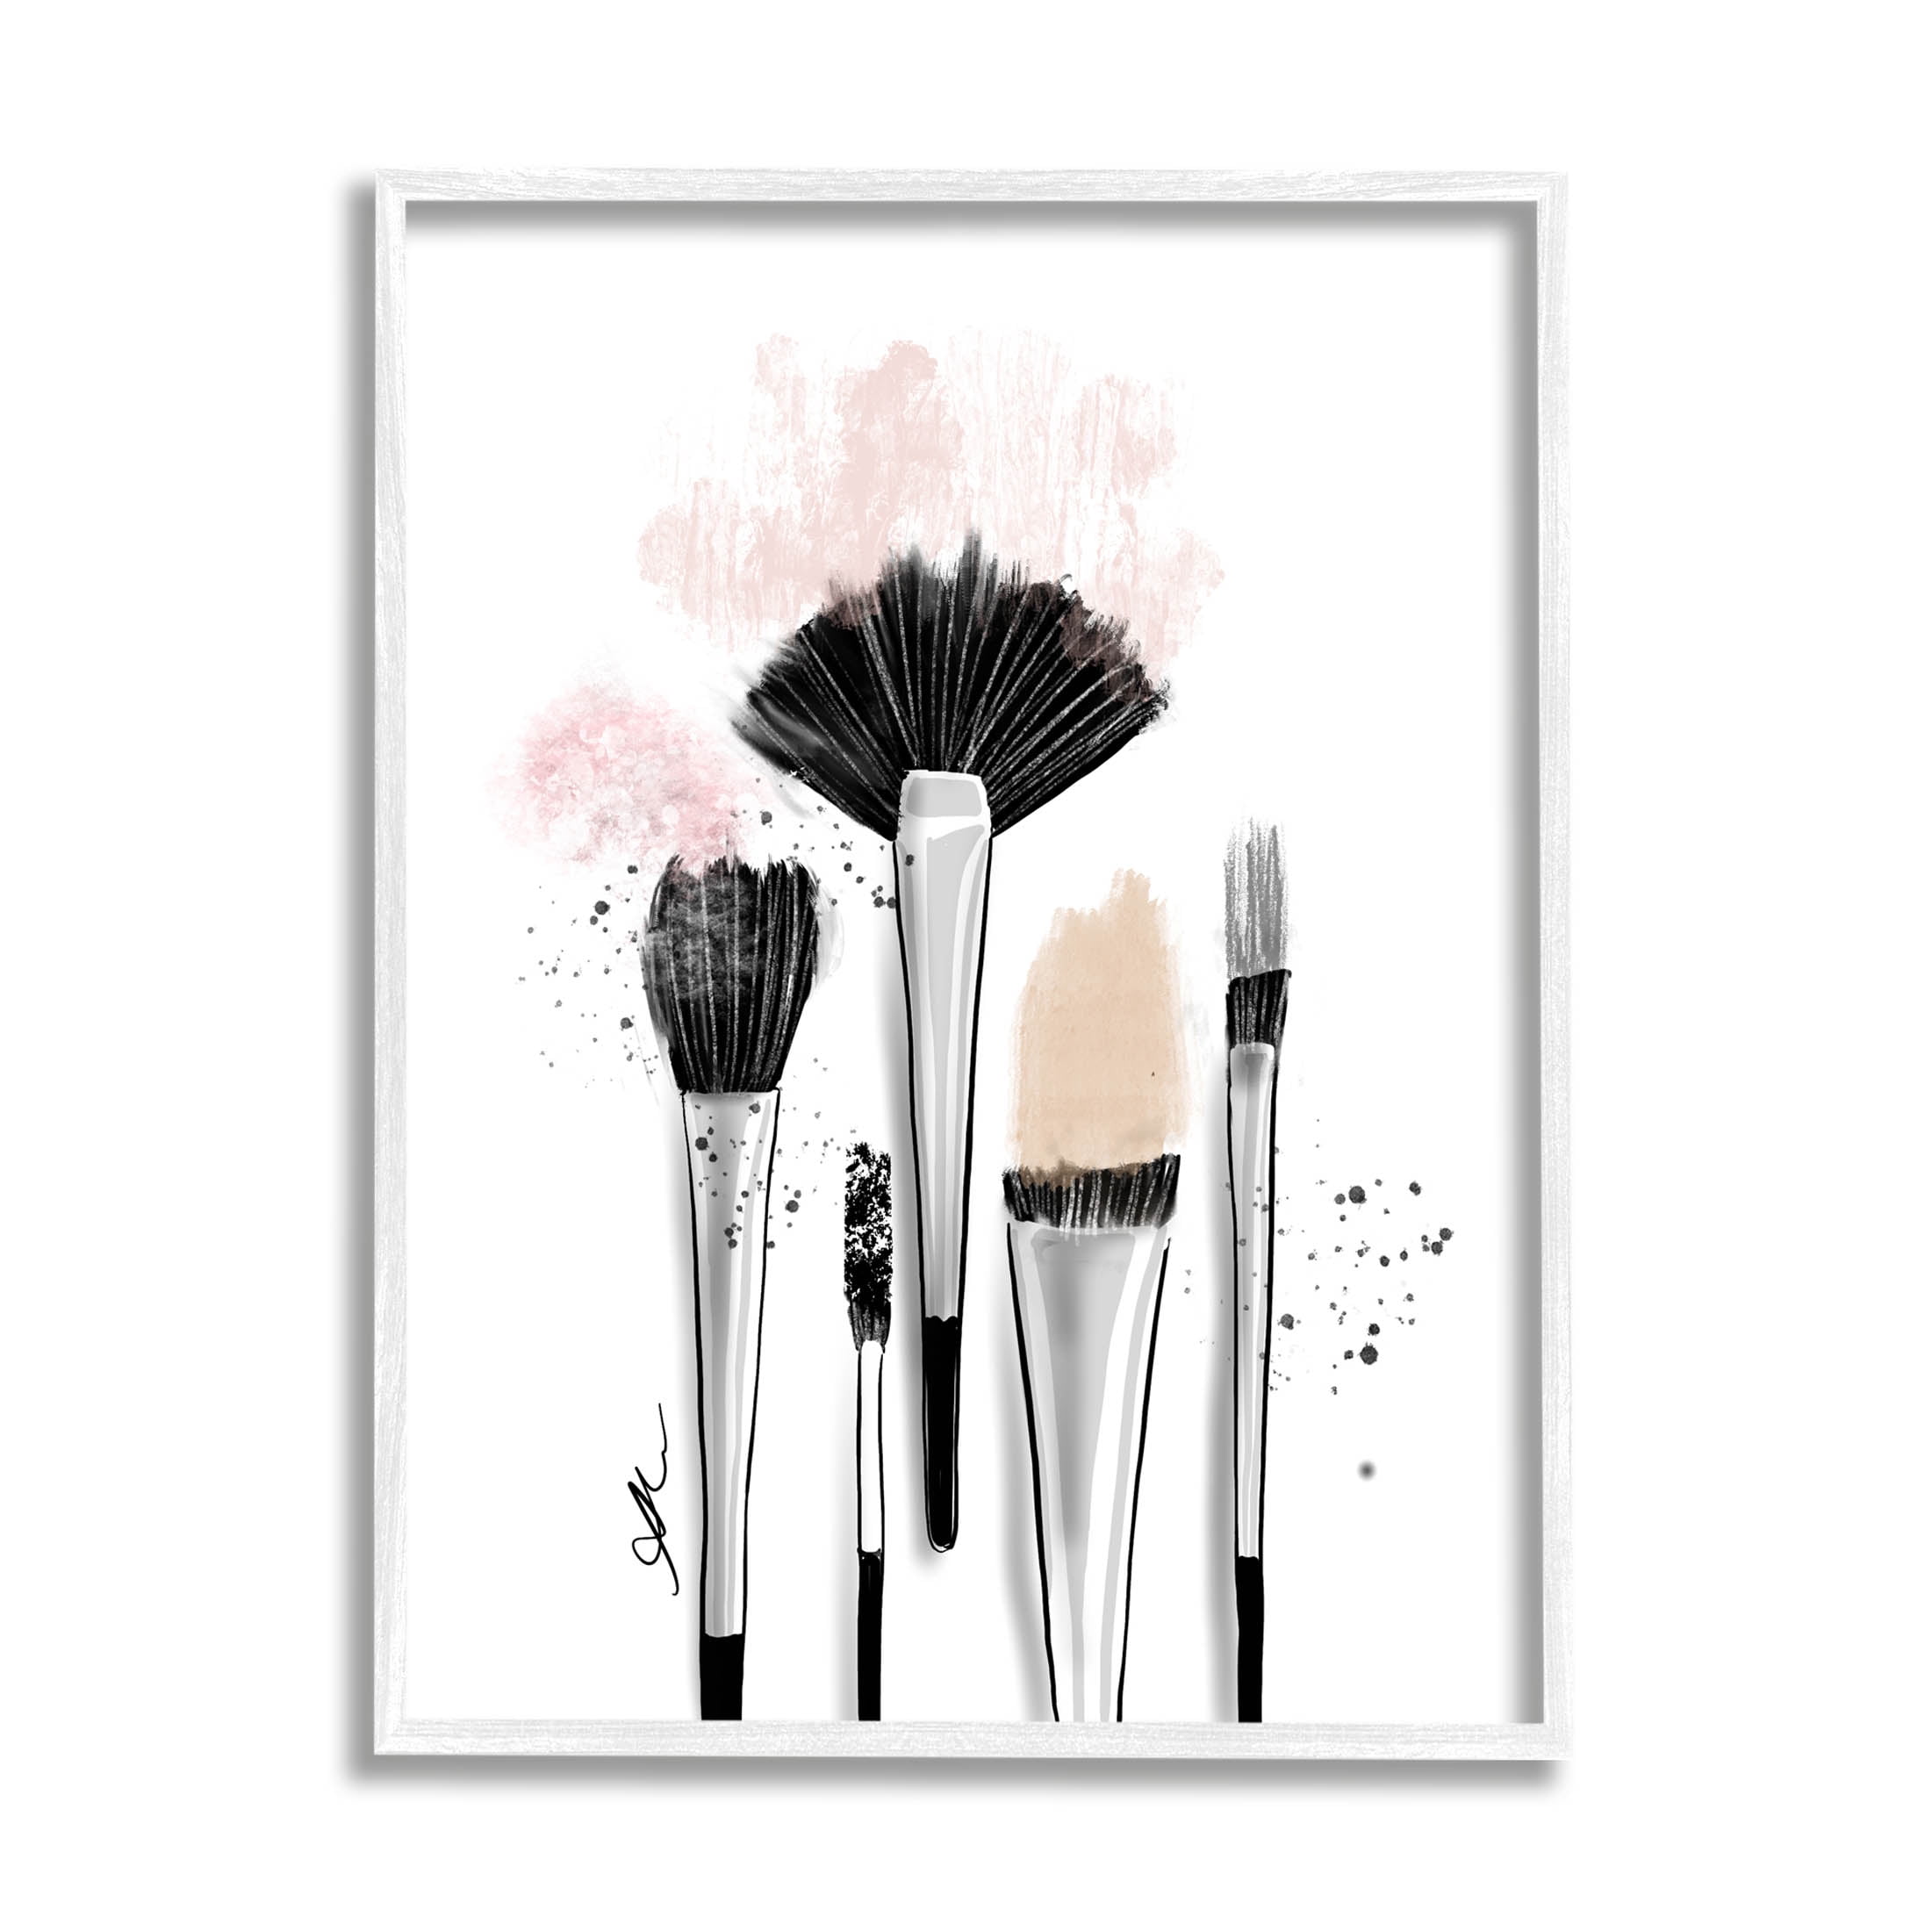 Paintbrushes Black And White Close Up Still Life Photo Matted Framed Art  Print Wall Decor 26x20 inch - Poster Foundry